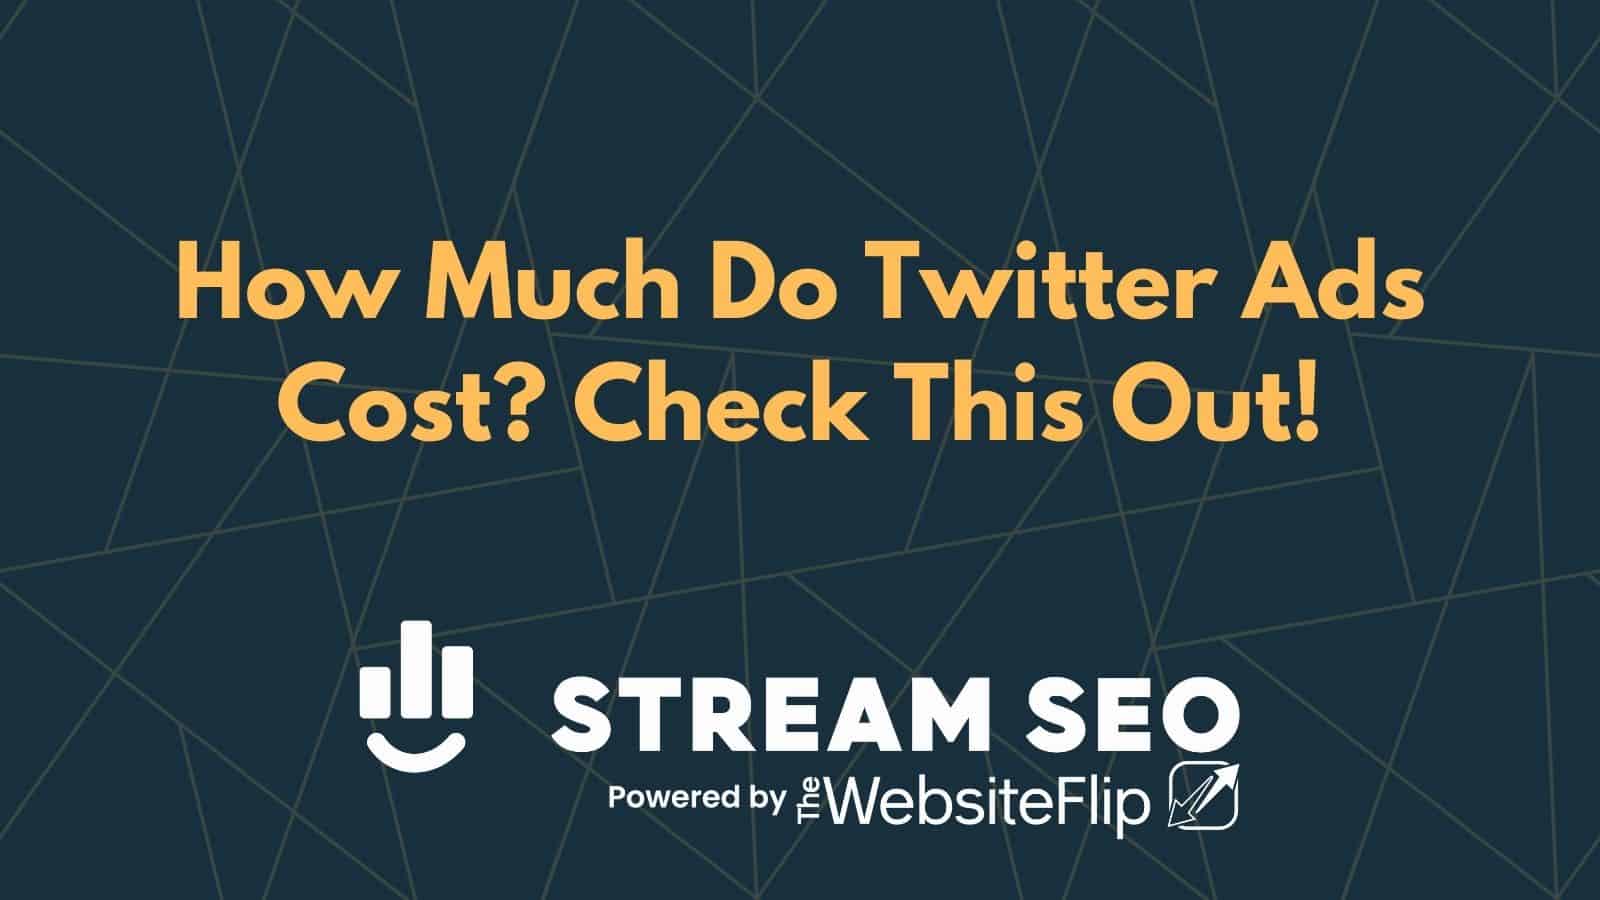 How Much Do Twitter Ads Cost? Check This Out!